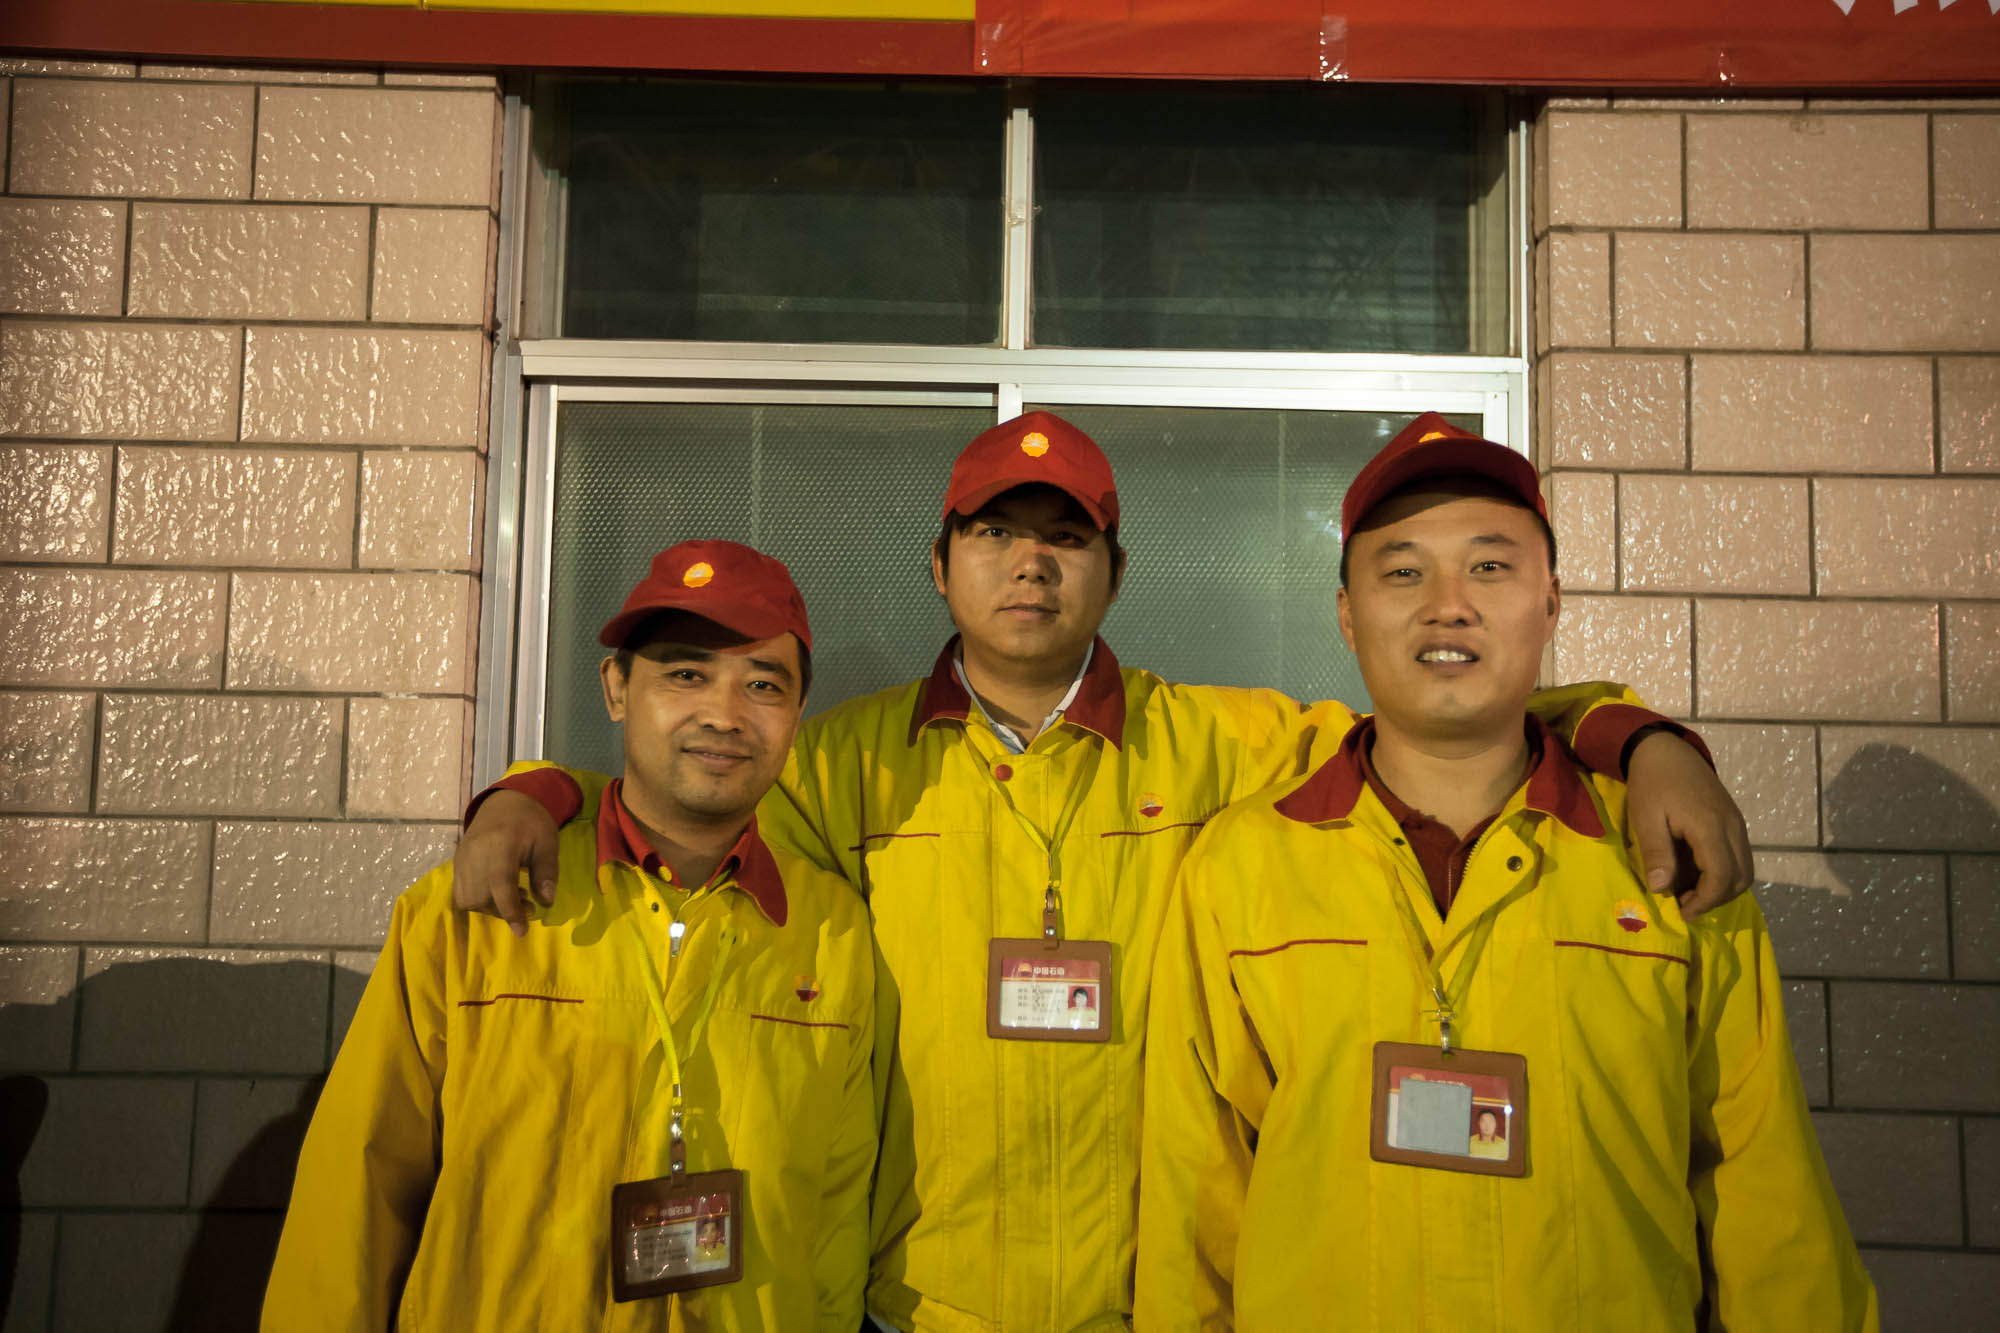 These guys from the gas station at Turpan let me use their restroom when it was really urgent